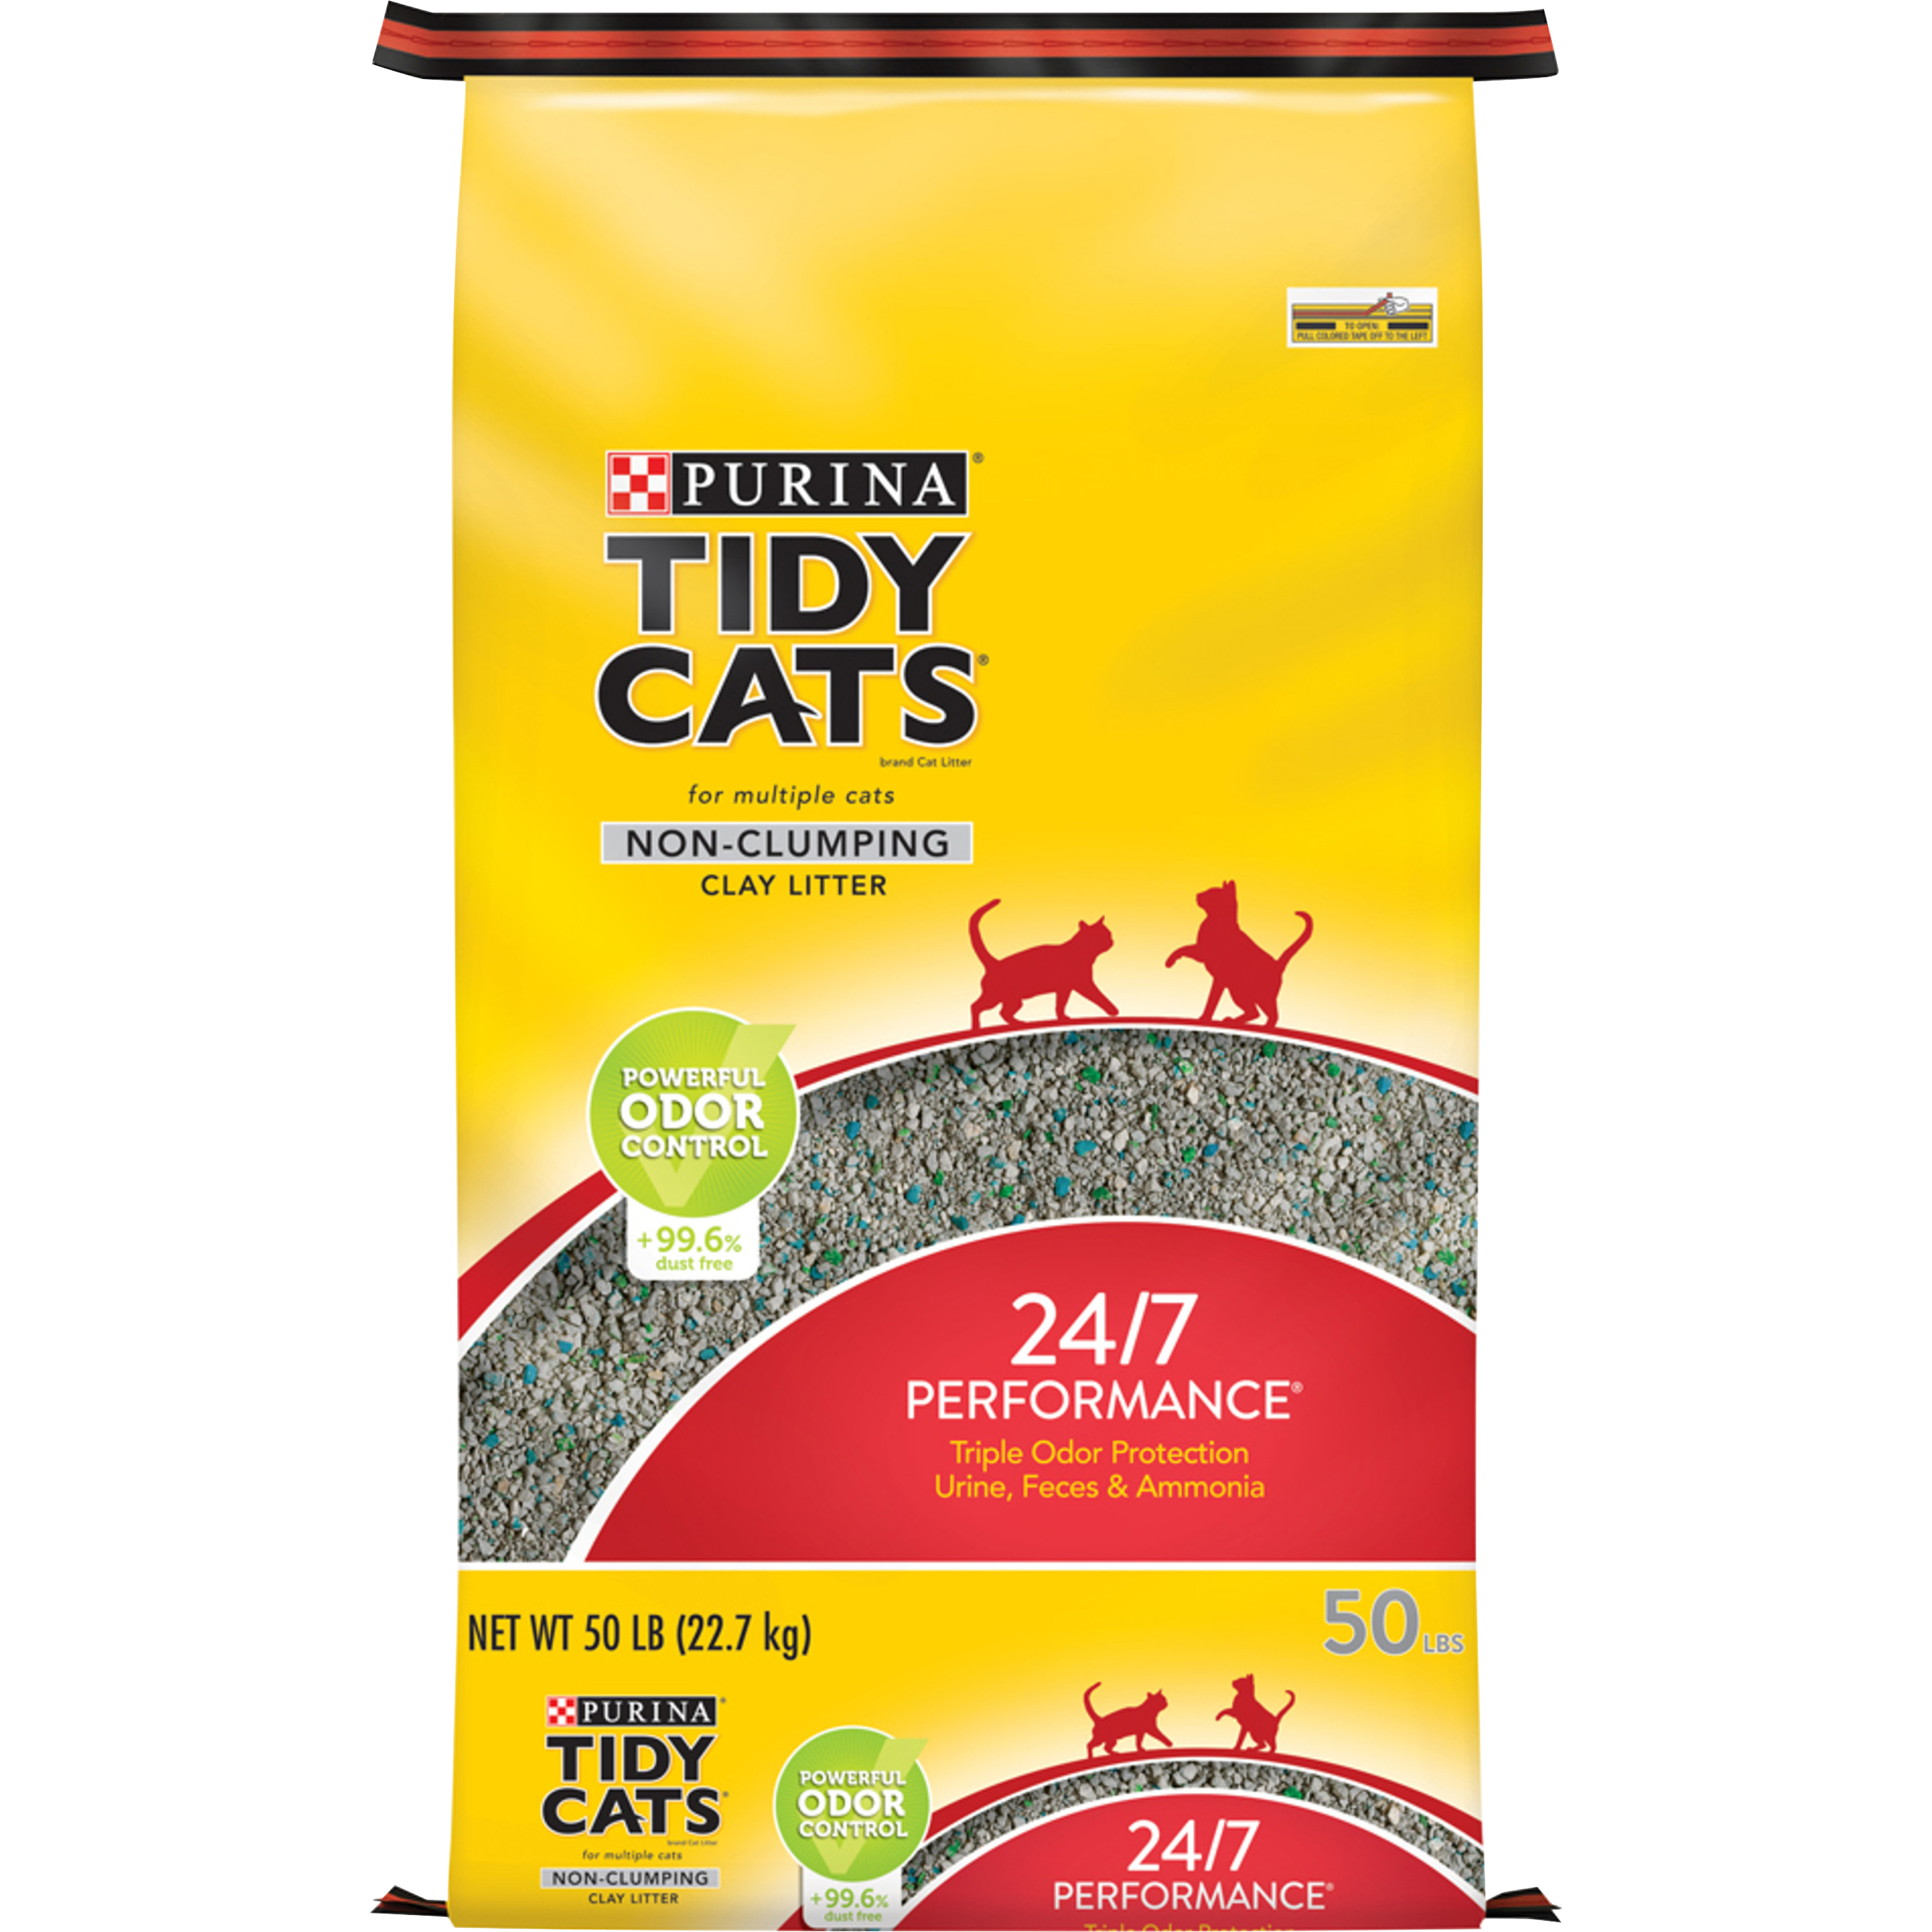 Purina Tidy Cats Non Clumping Cat Litter, 24/7 Performance Multi Cat ...